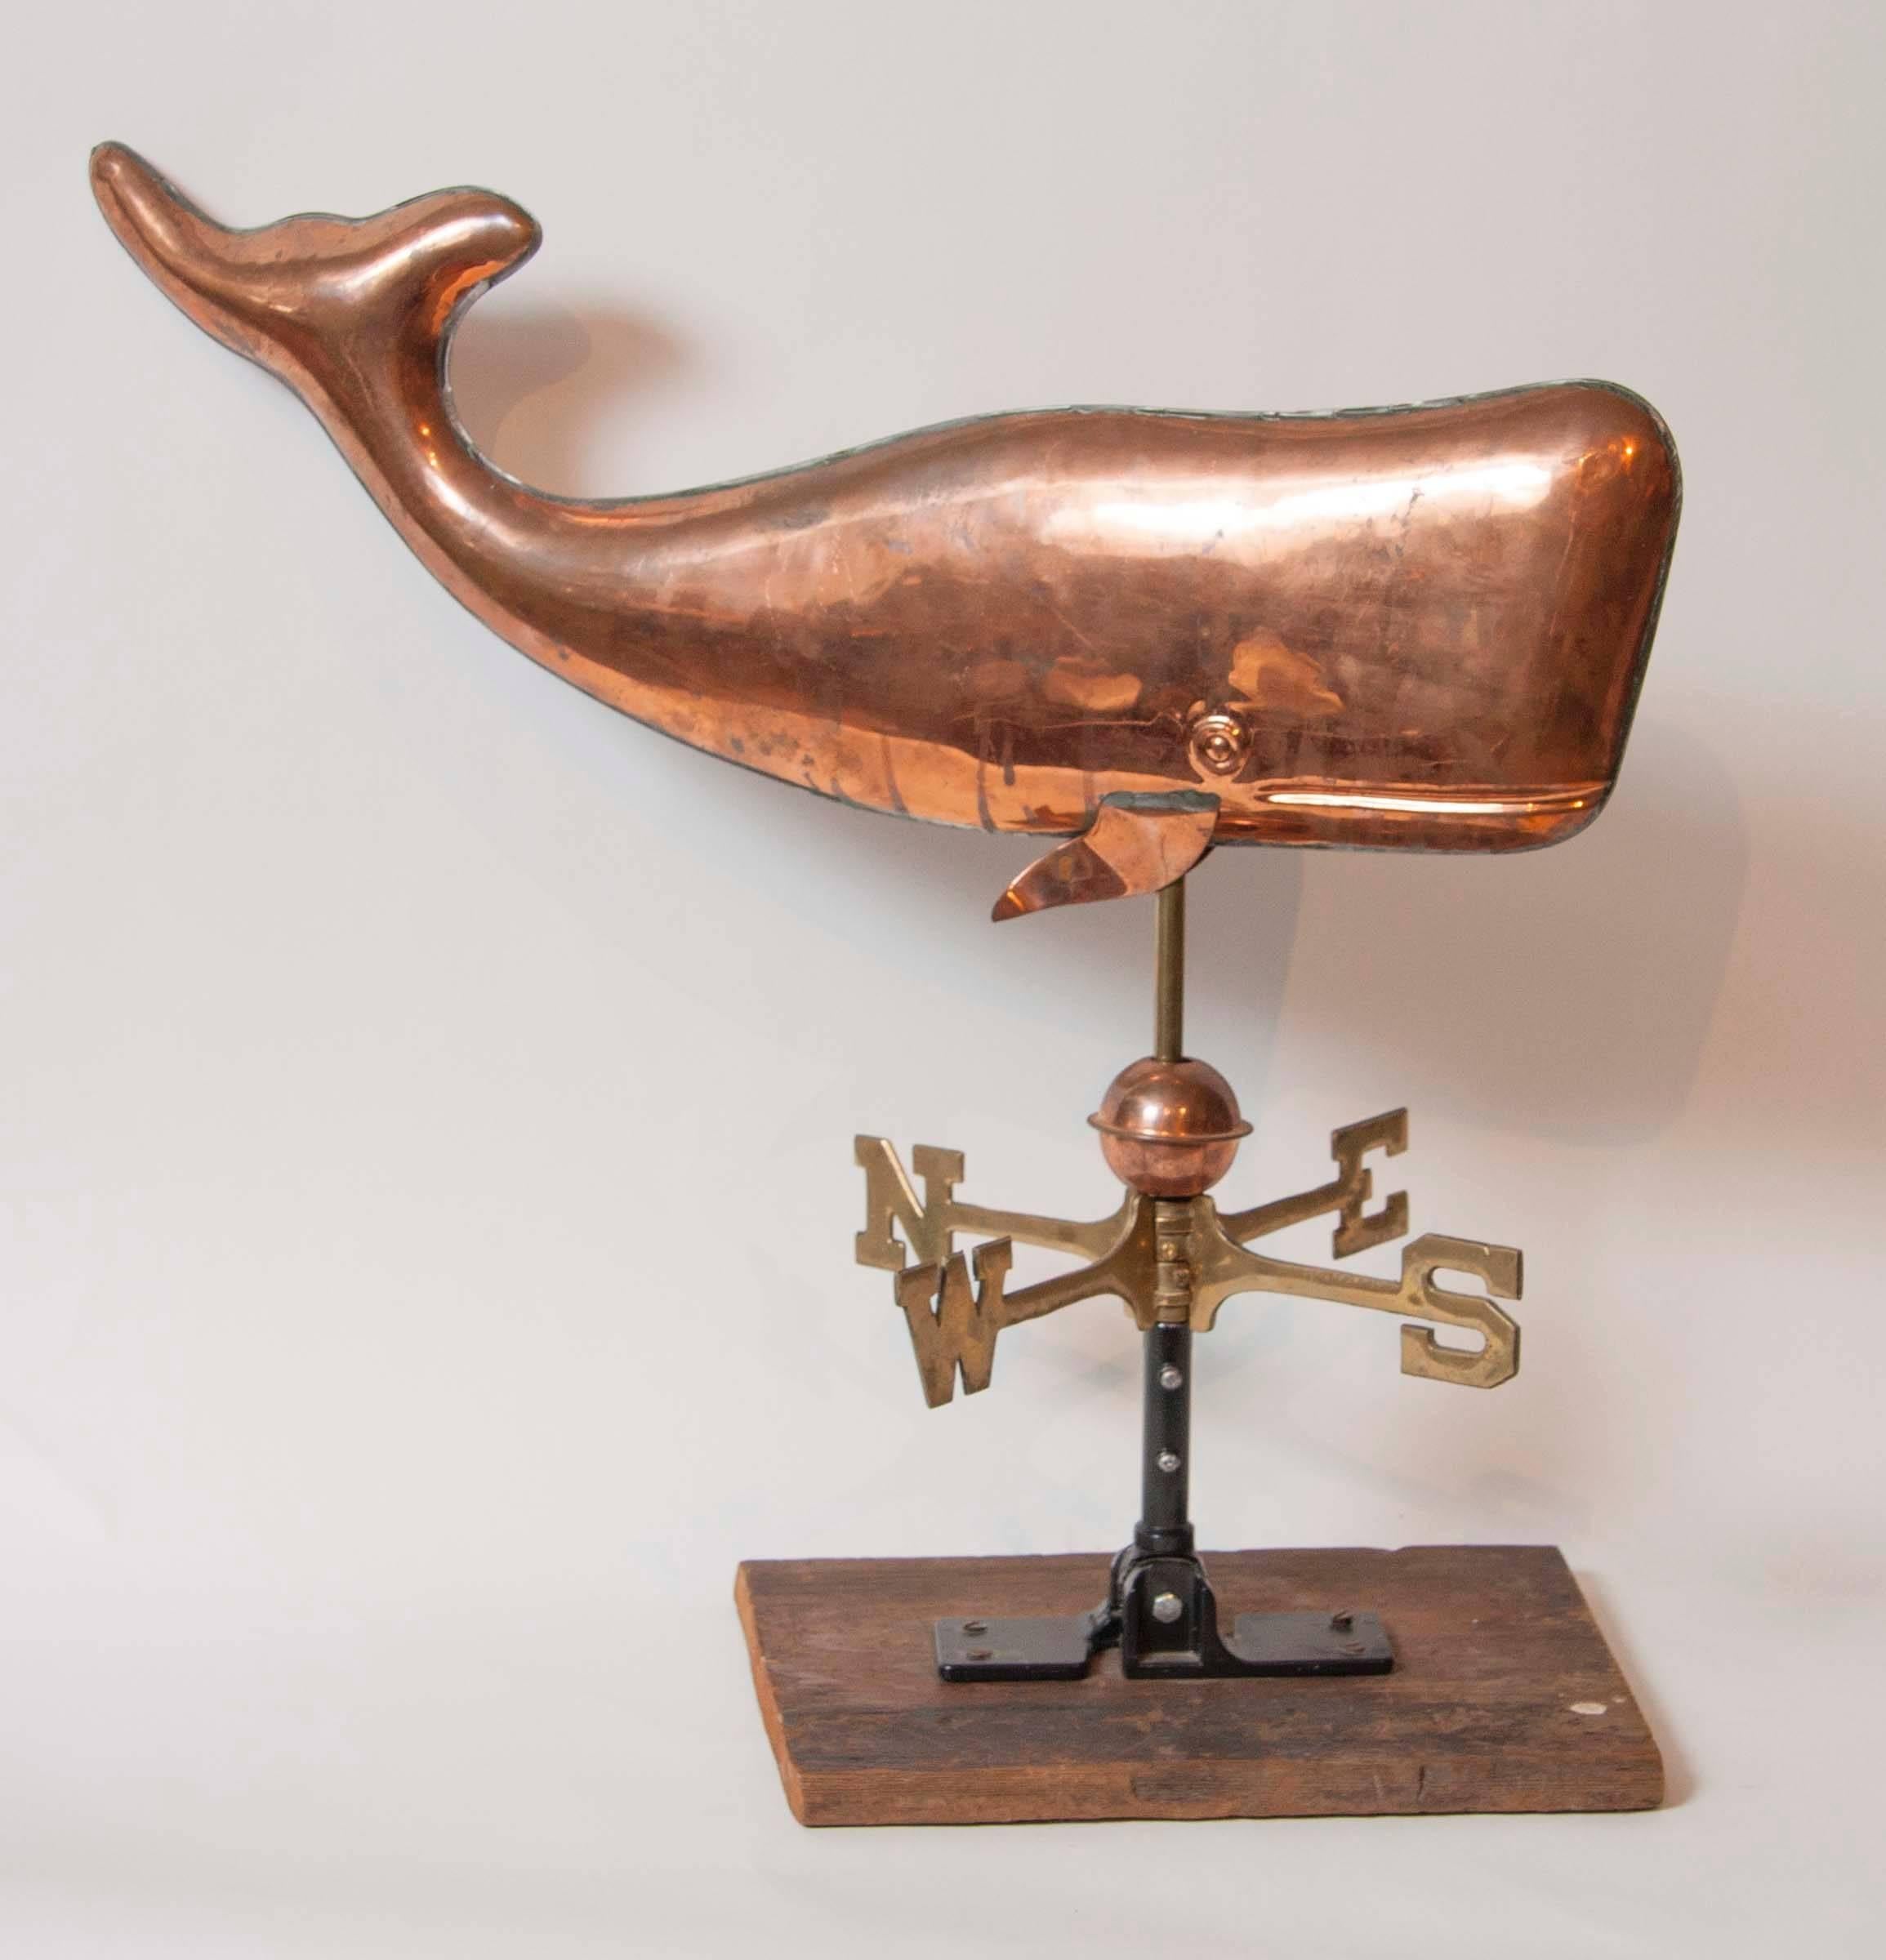 A wonderful copper weathervane in the form of a whale.